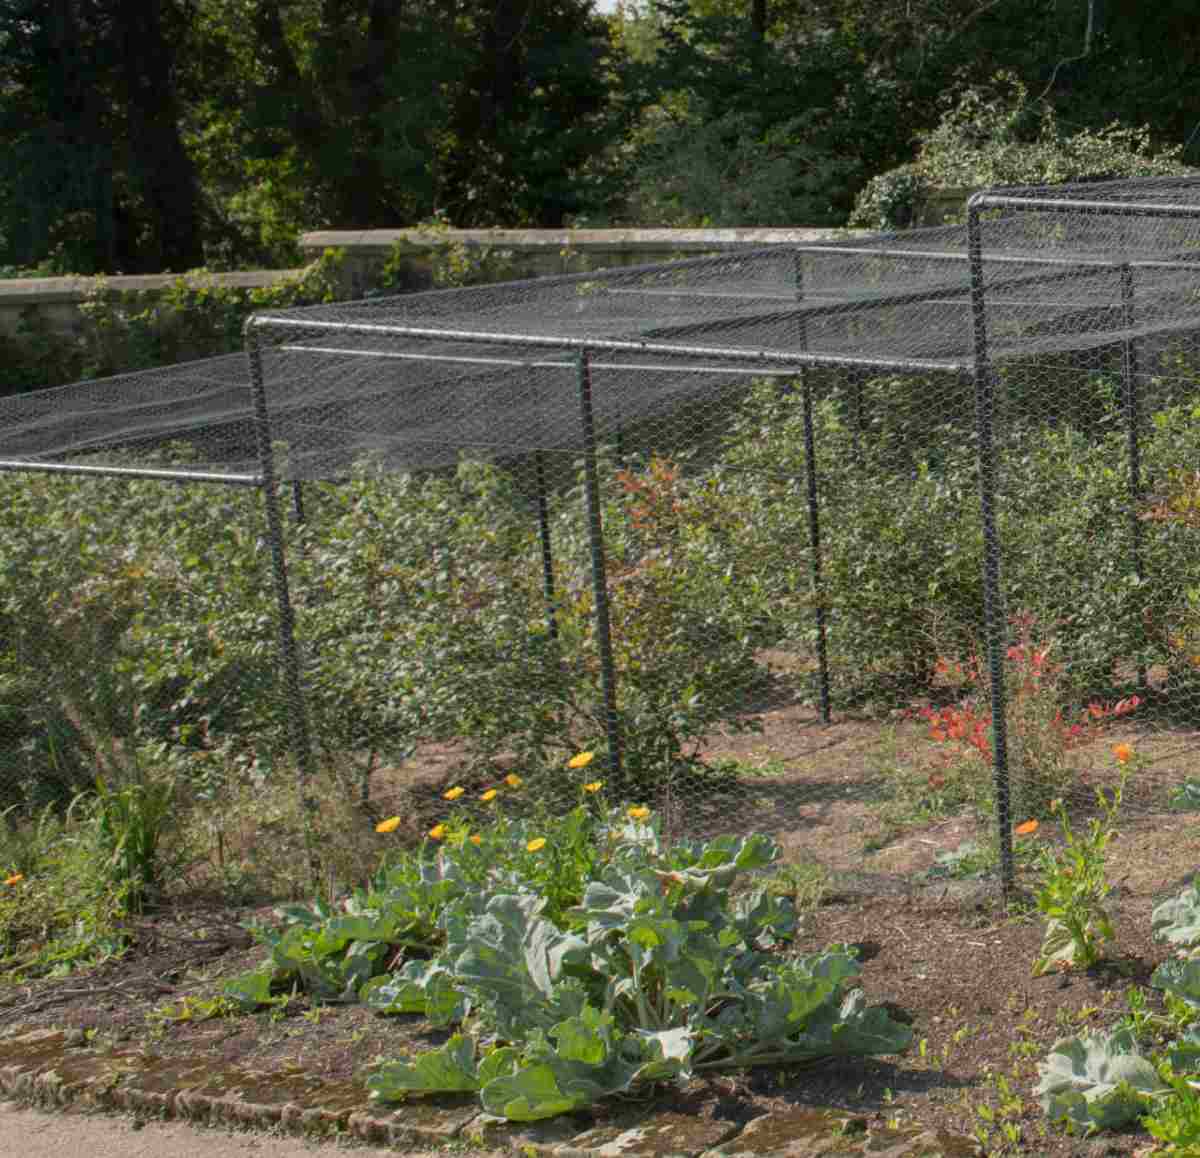 Garden with cage for protection from squirrels and other animals.